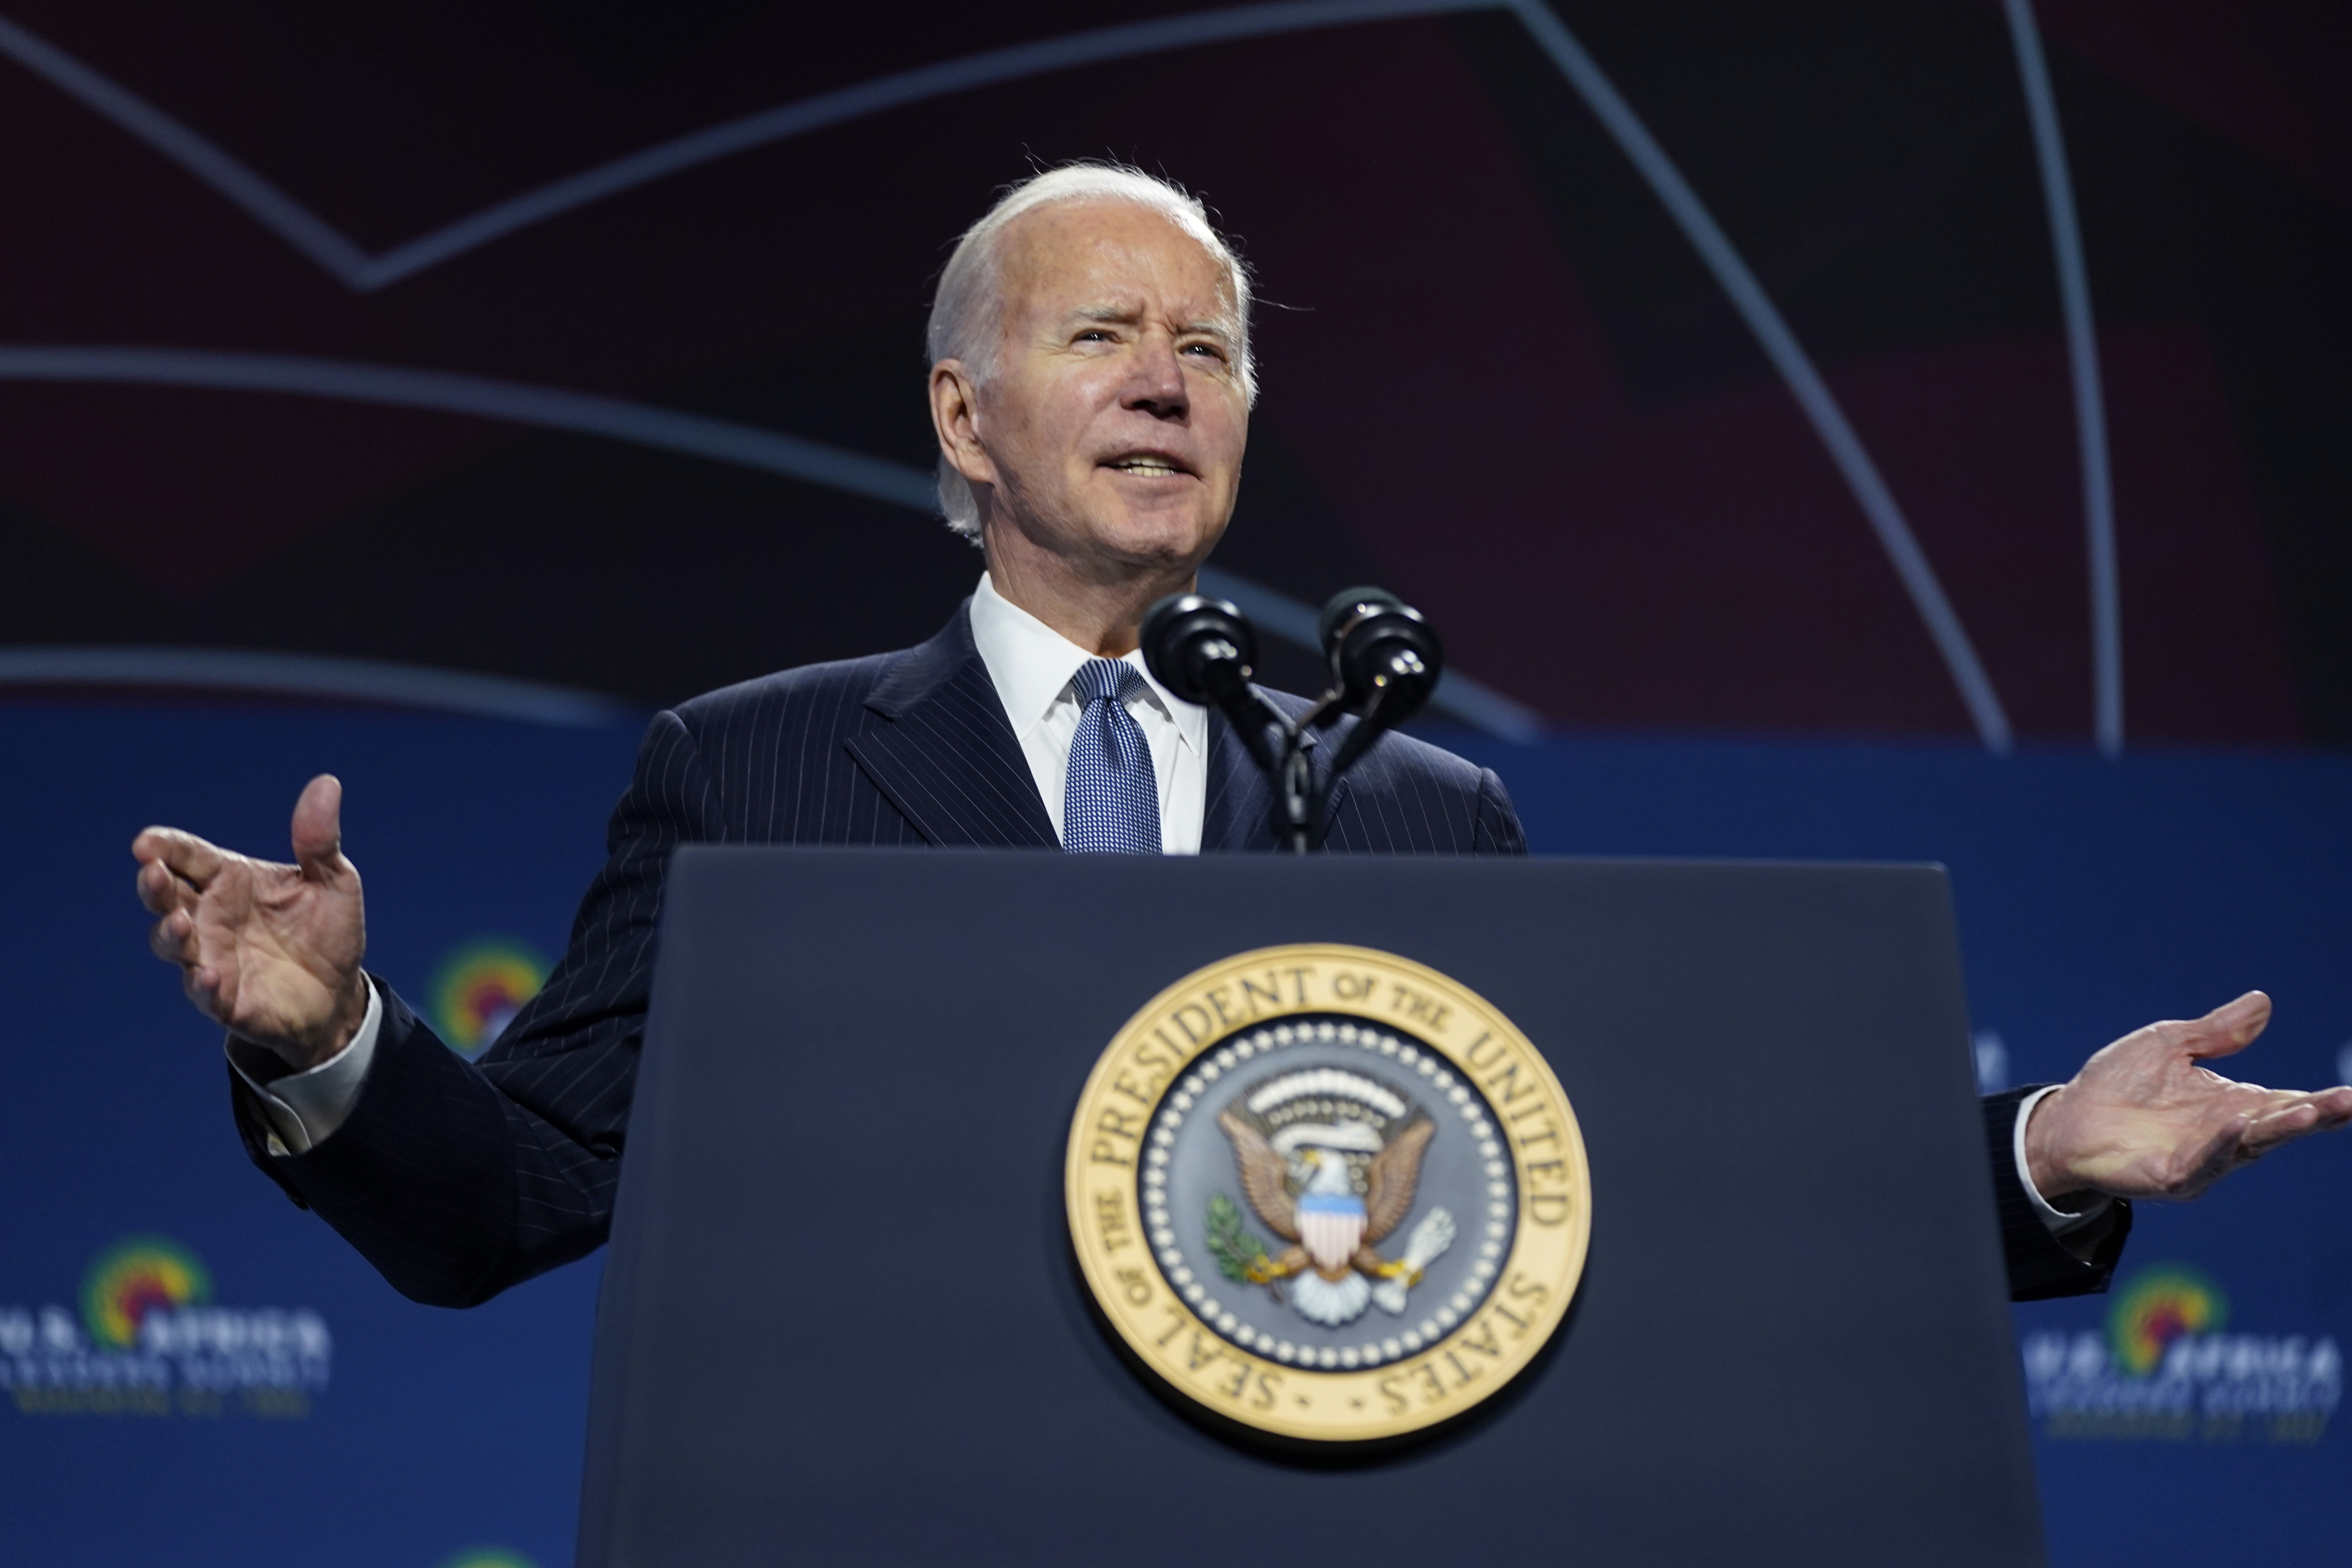 Biden Administration to Offer Up to 4 Free COVID-19 Tests as Part of Winter Plan